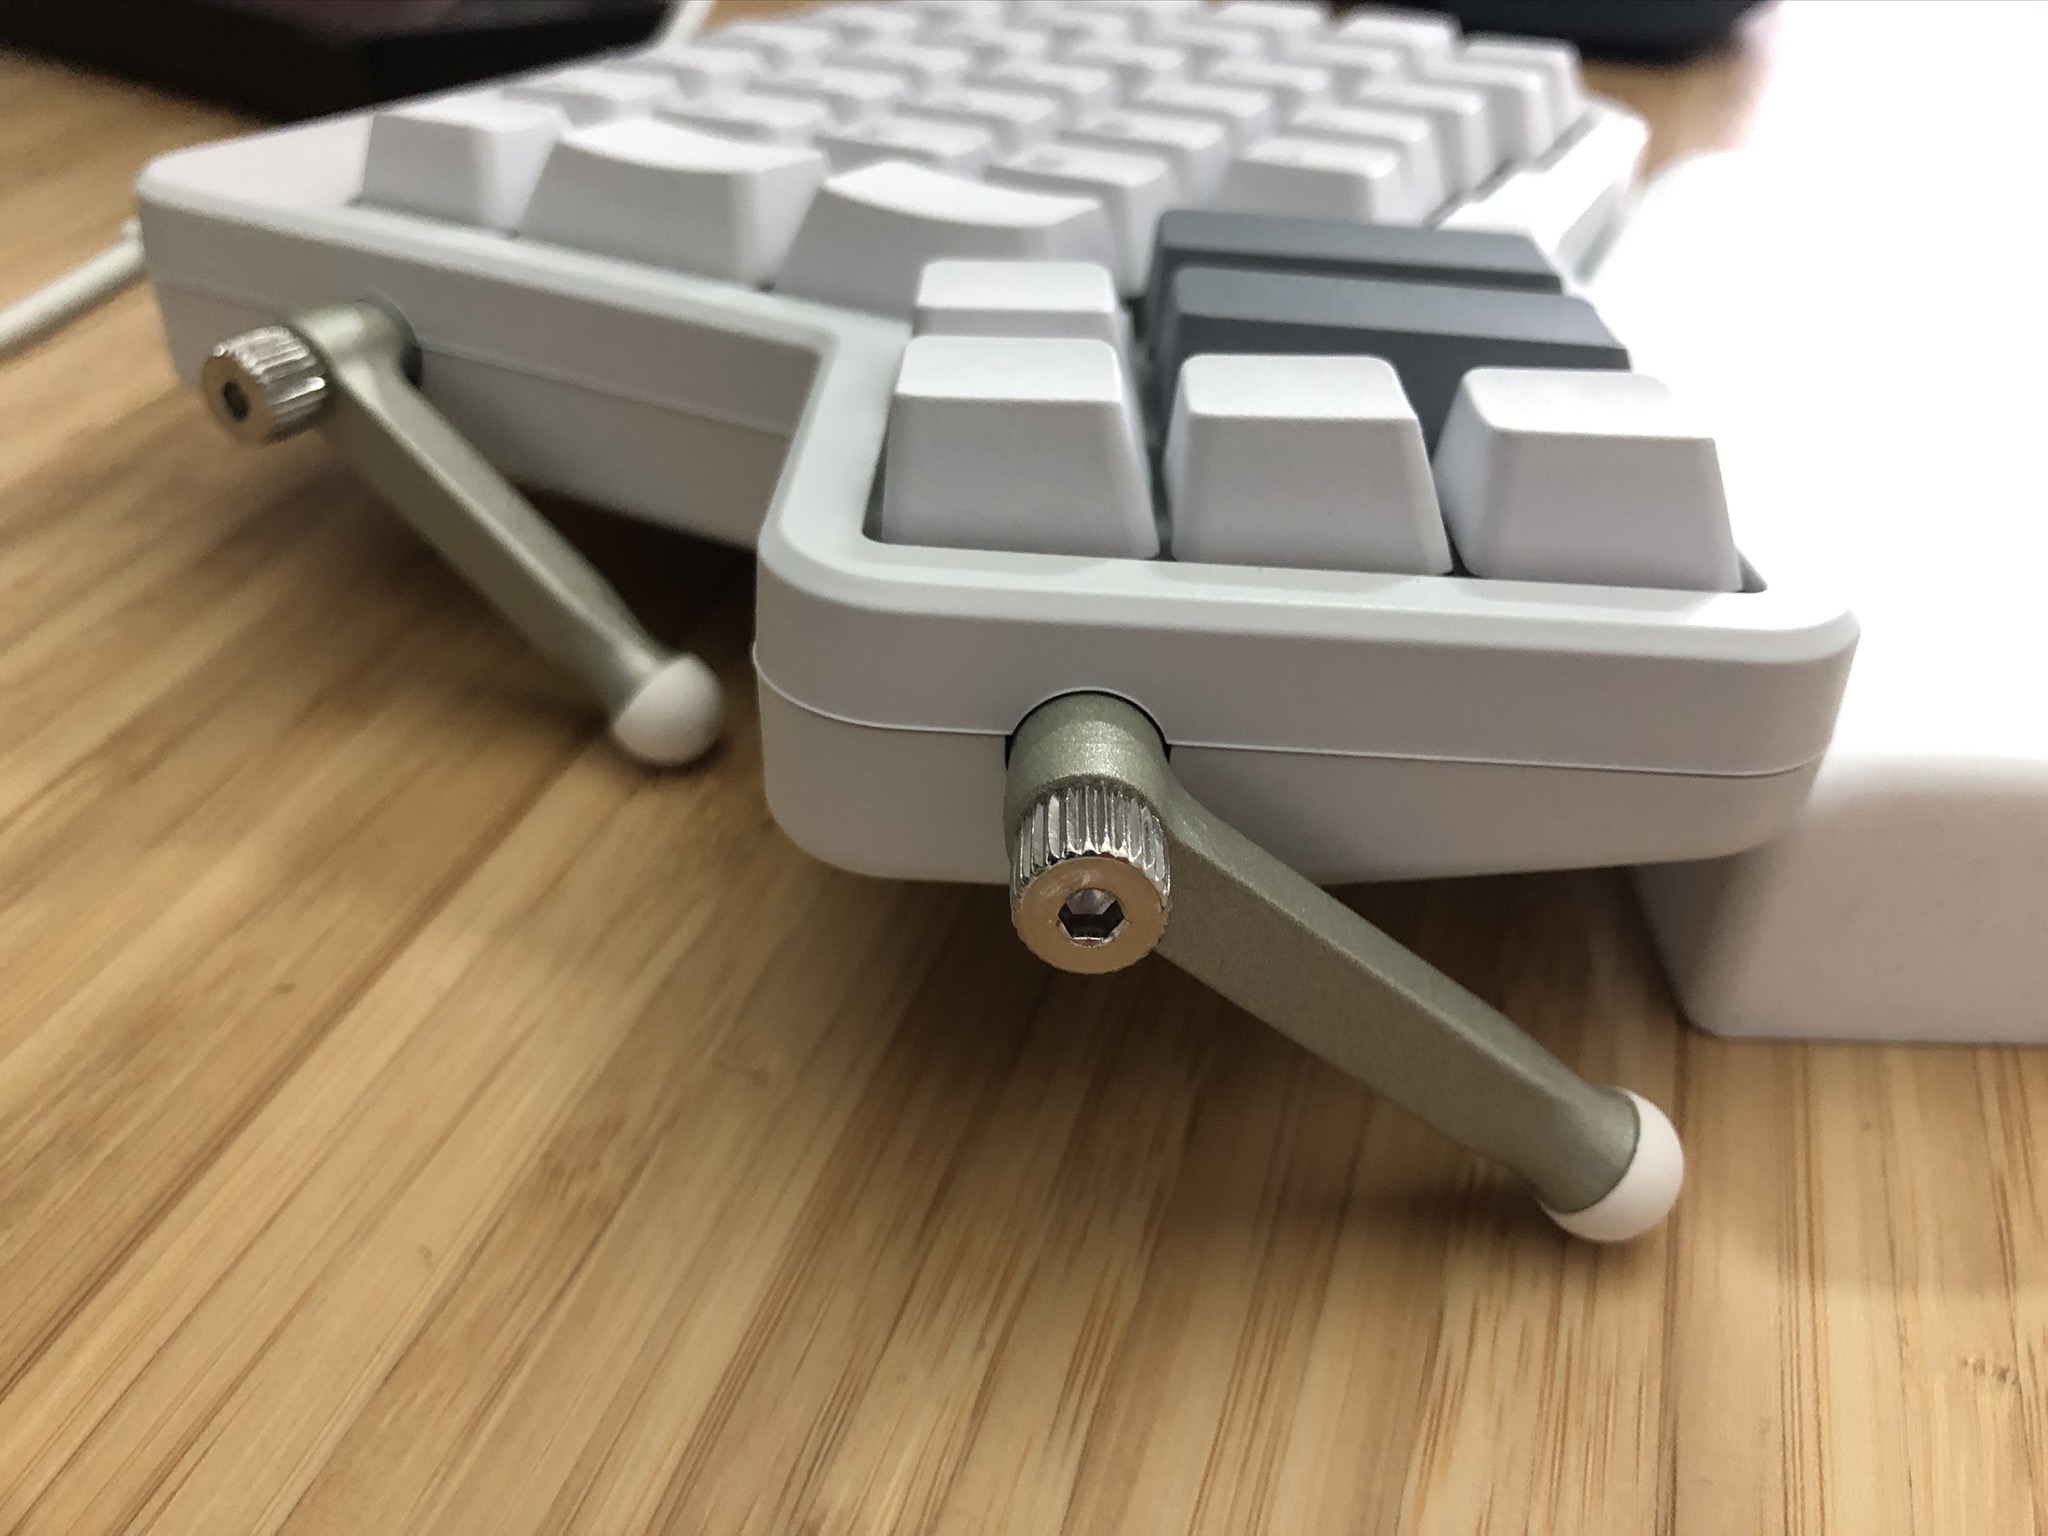 The tenting solution of the ErgoDox EZ